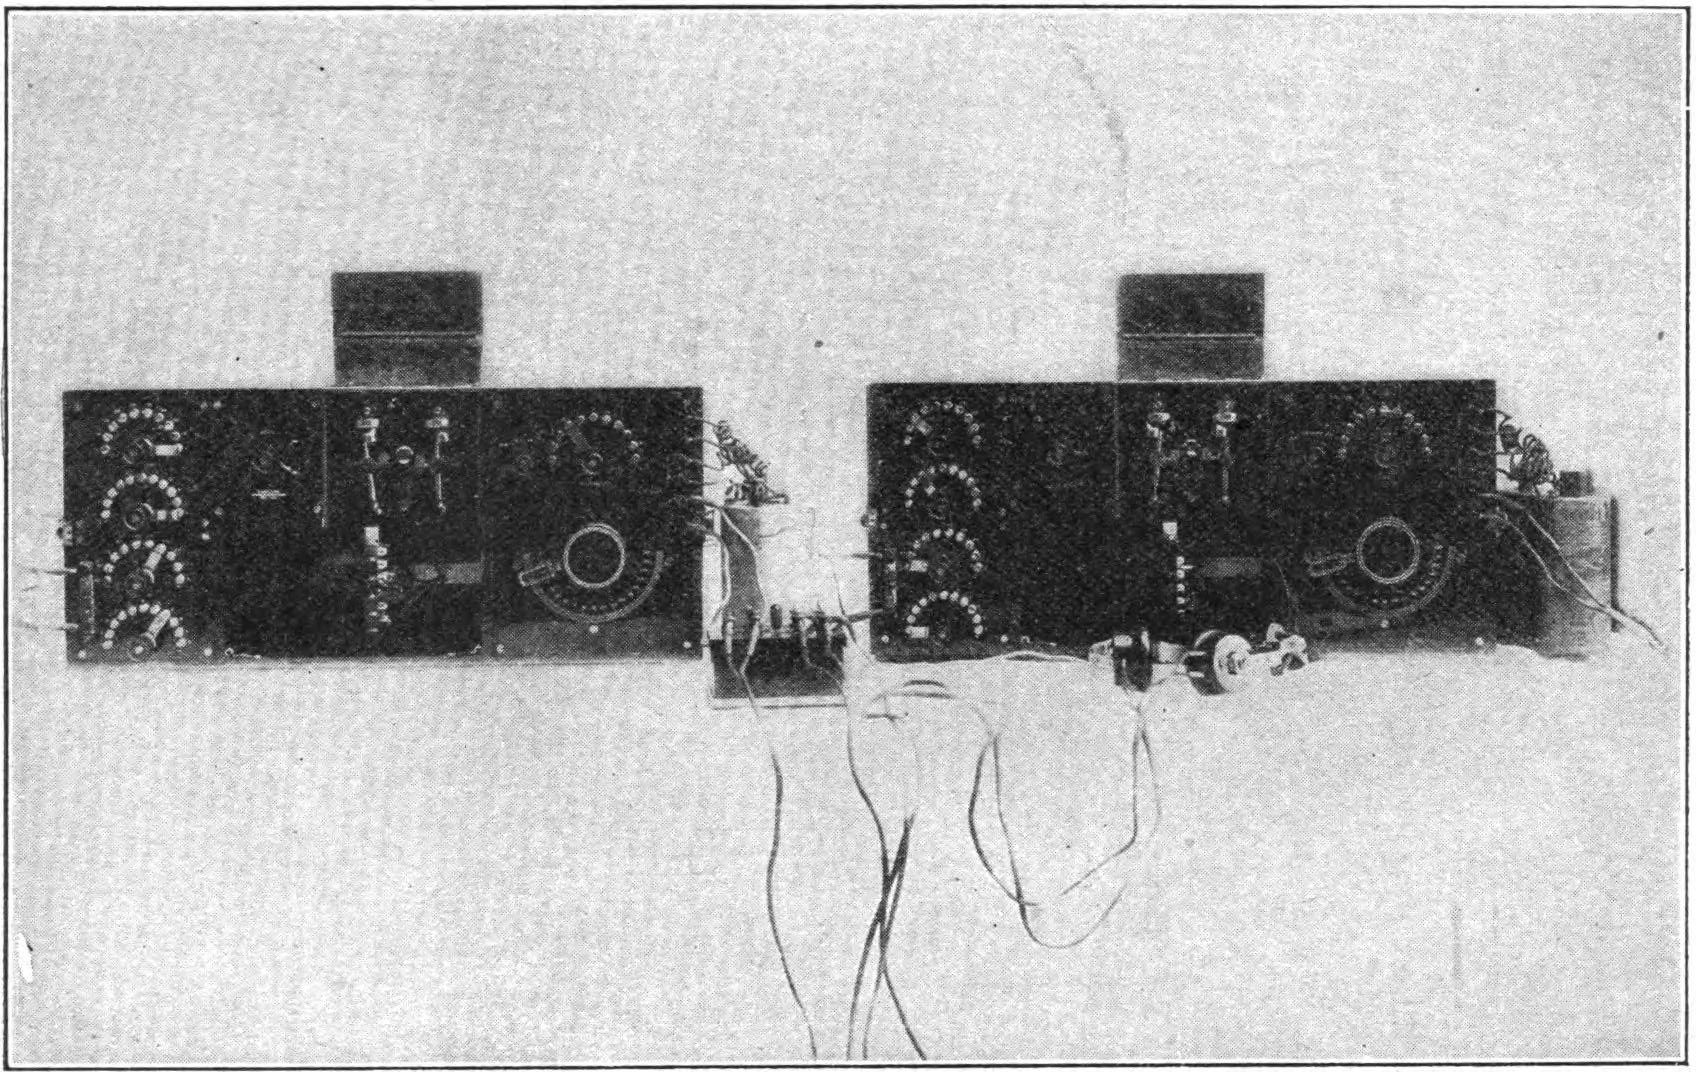 FIG. 117.—Duplex receiving apparatus. The set to the left may be adjusted to receive short wave lengths and that to the right to receive long waves. When the handle of the "listening" key, shown in the center of the illustration, is in the center, the left hand phone of the head set is connected to the instruments on the left and the right hand phone to those on the right, so that the operator is always ready to receive either short or long waves if received. Swinging the key connects both phones to either set at will.